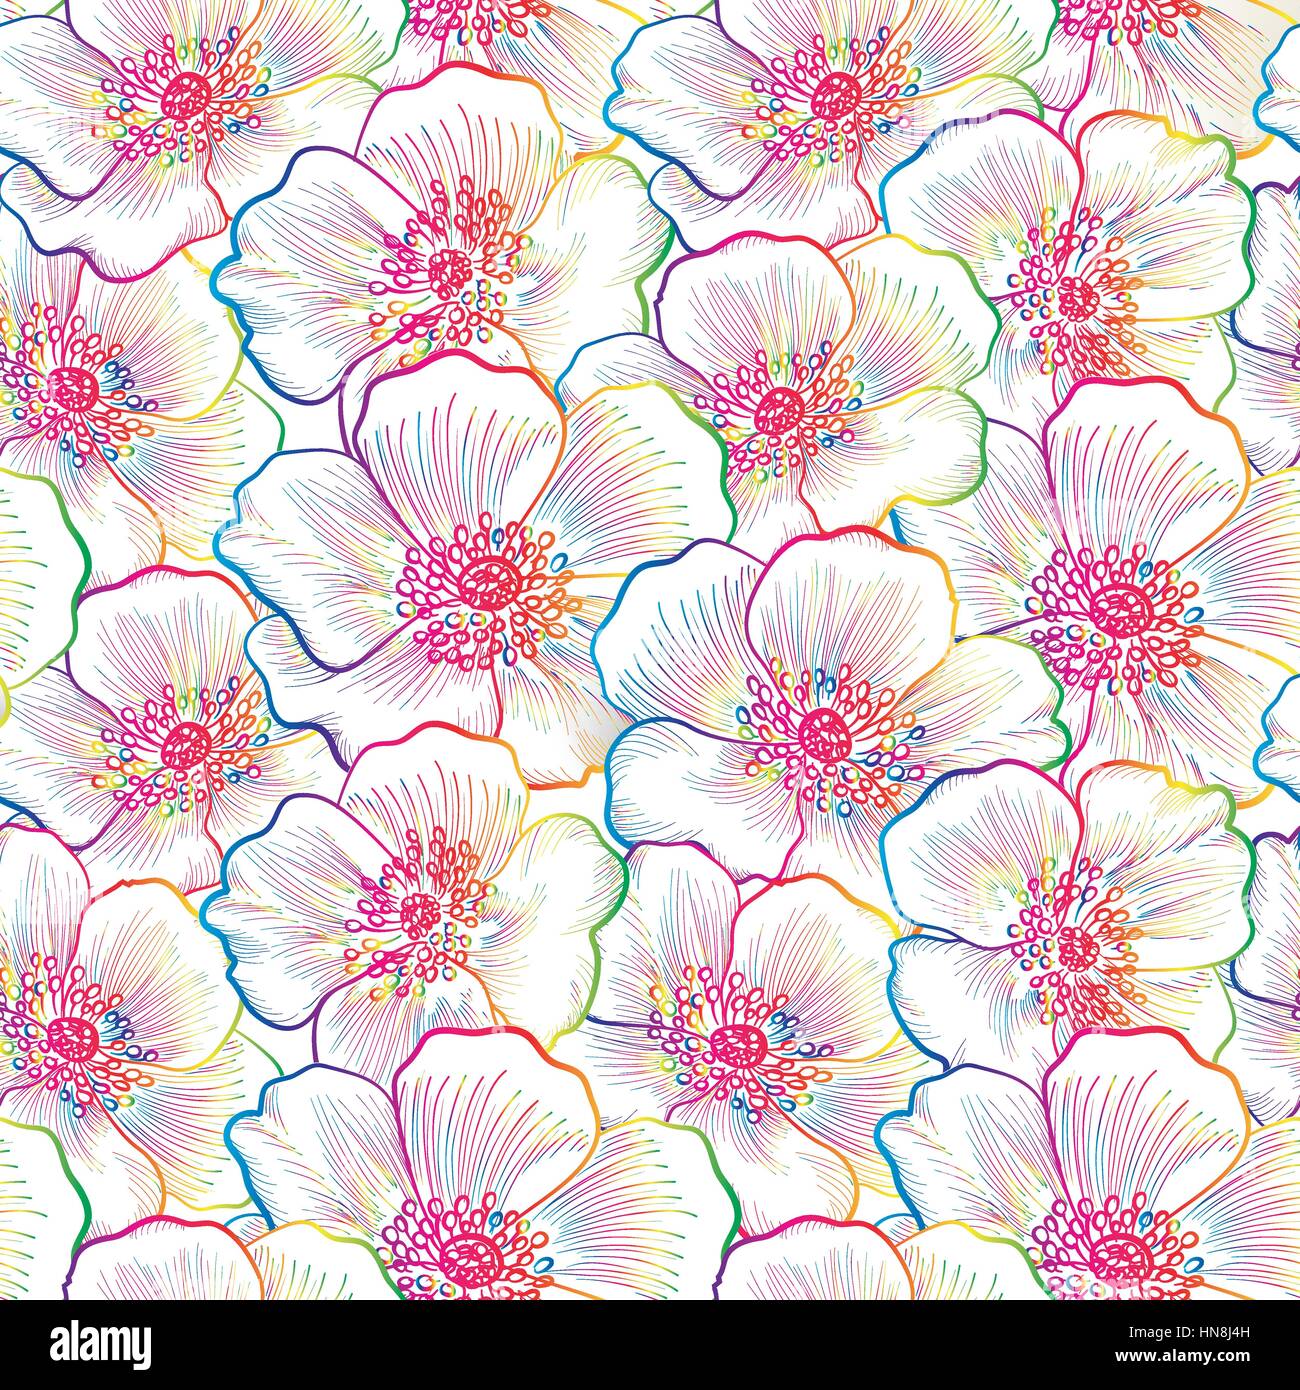 Floral seamless pattern. Flower rose background. Floral seamless texture with flowers. Stock Vector